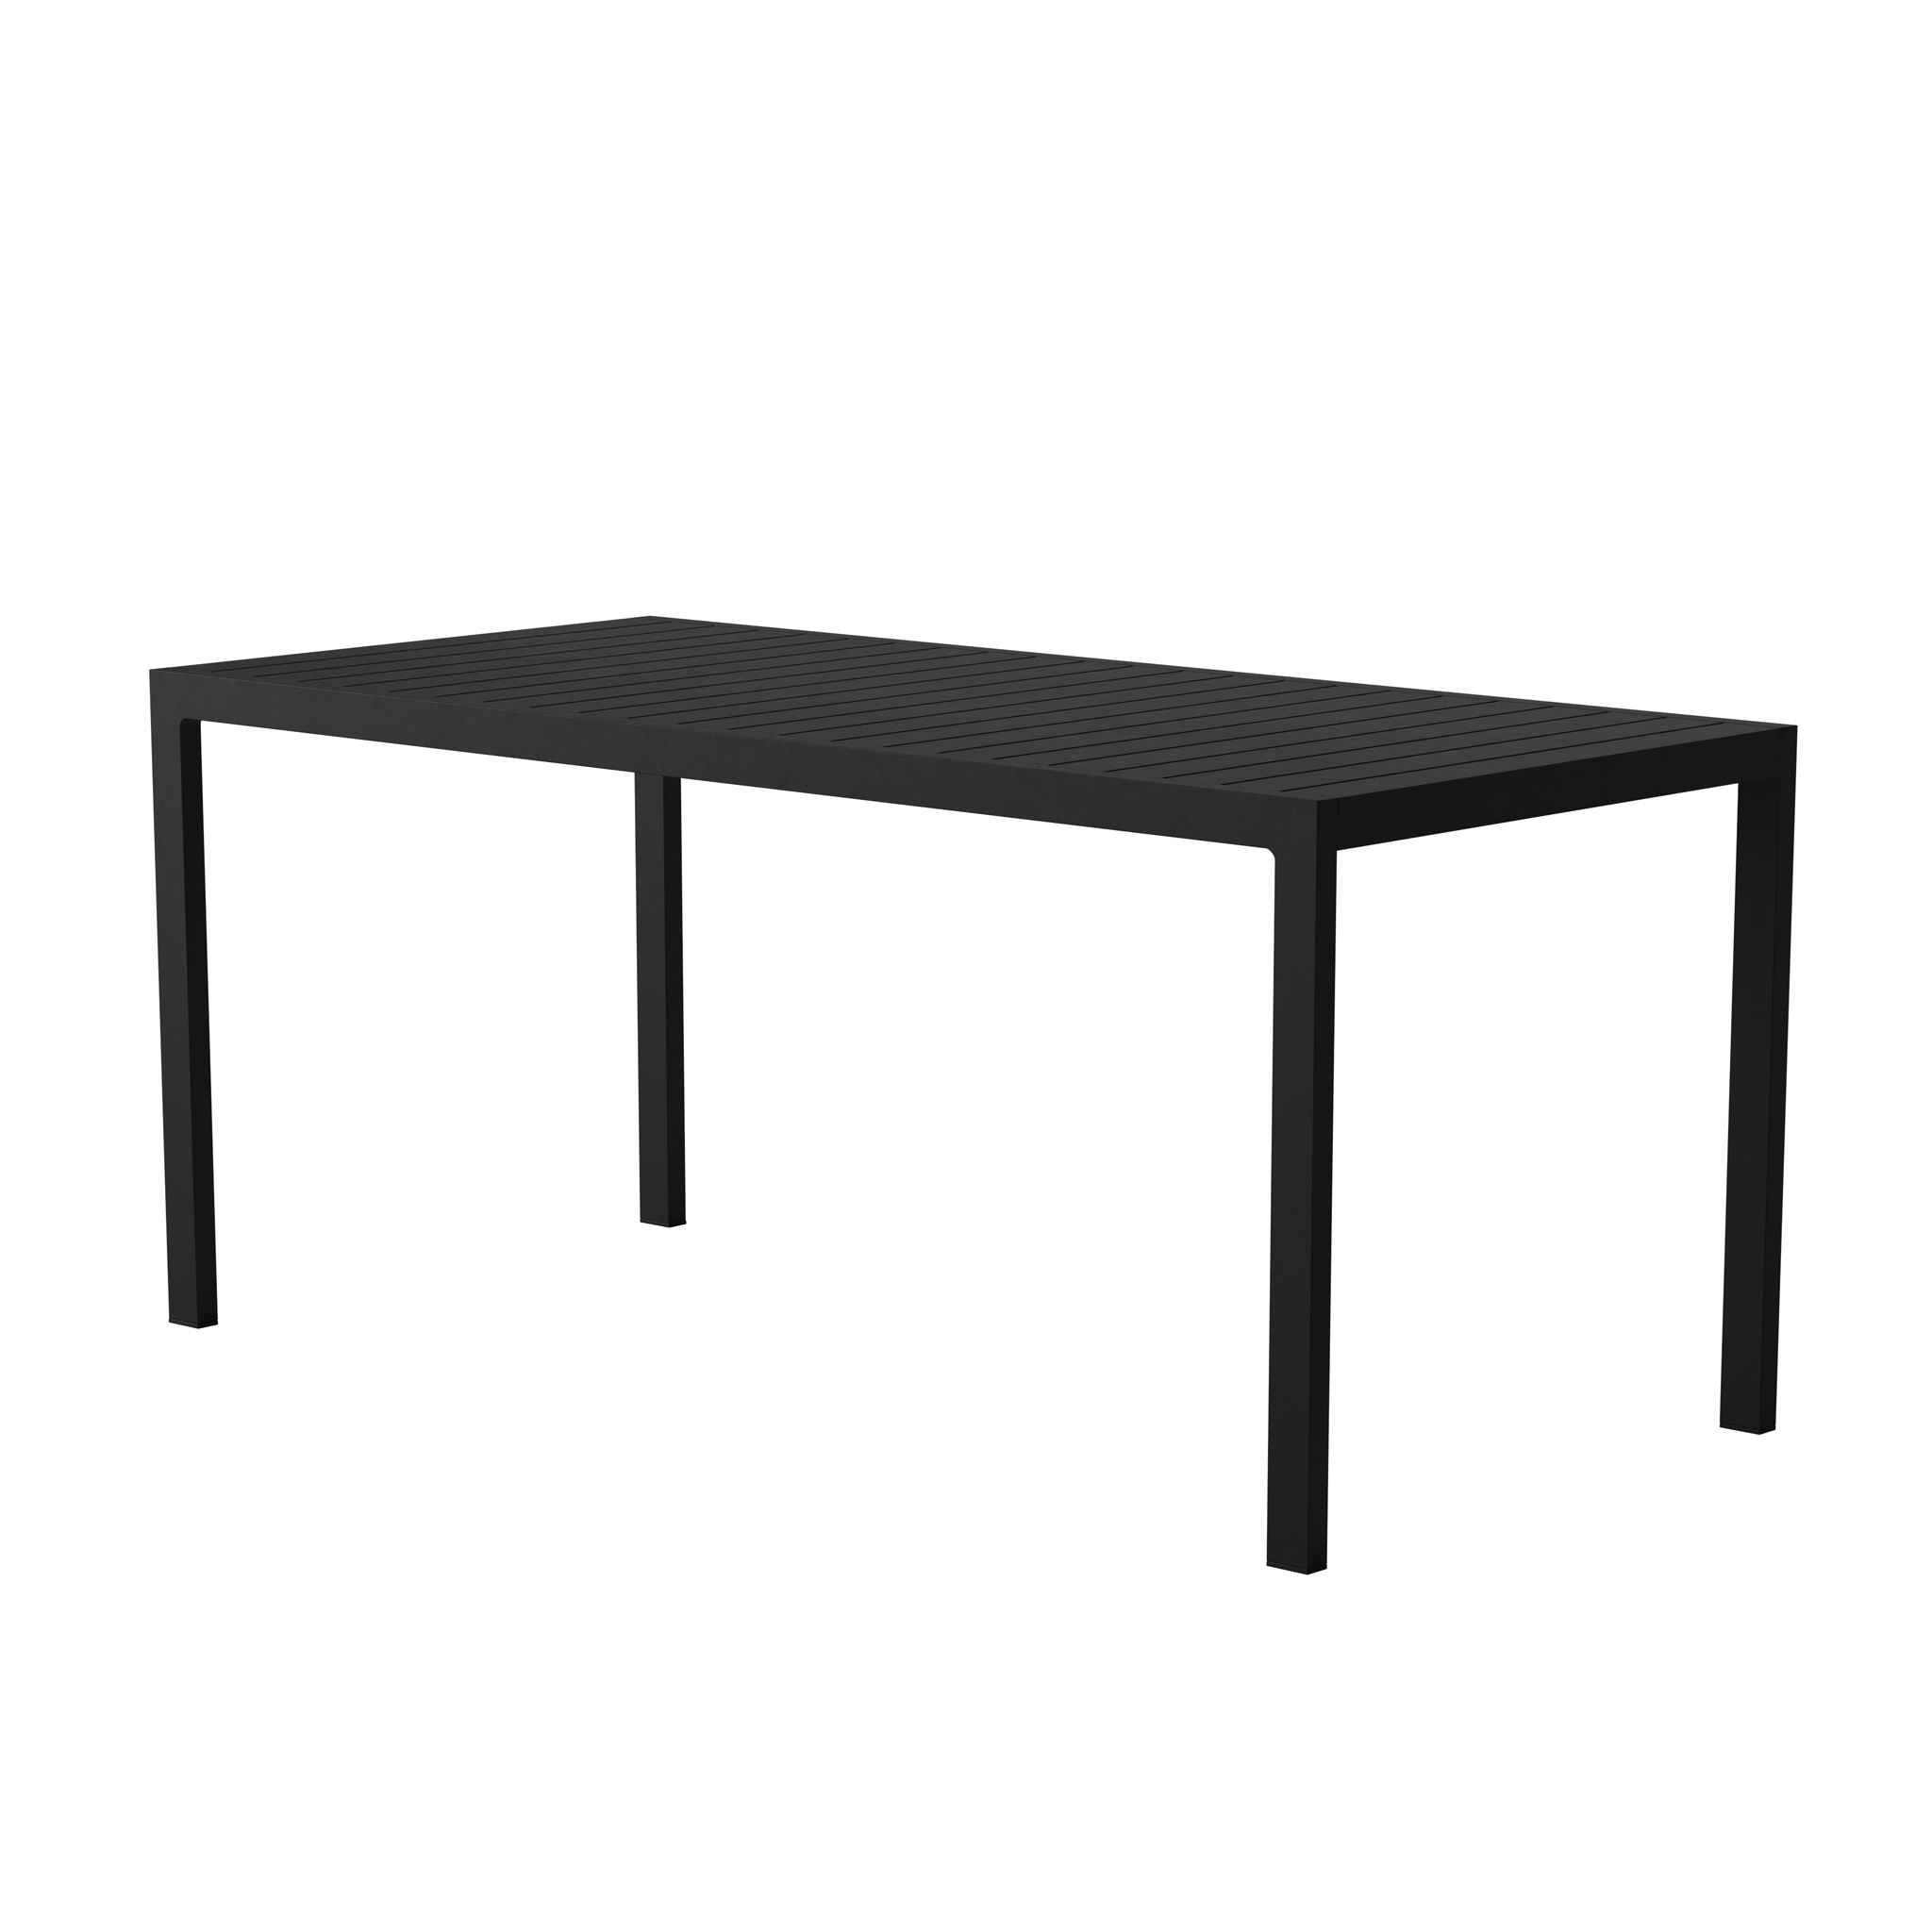 Eos Rectangular table by Case